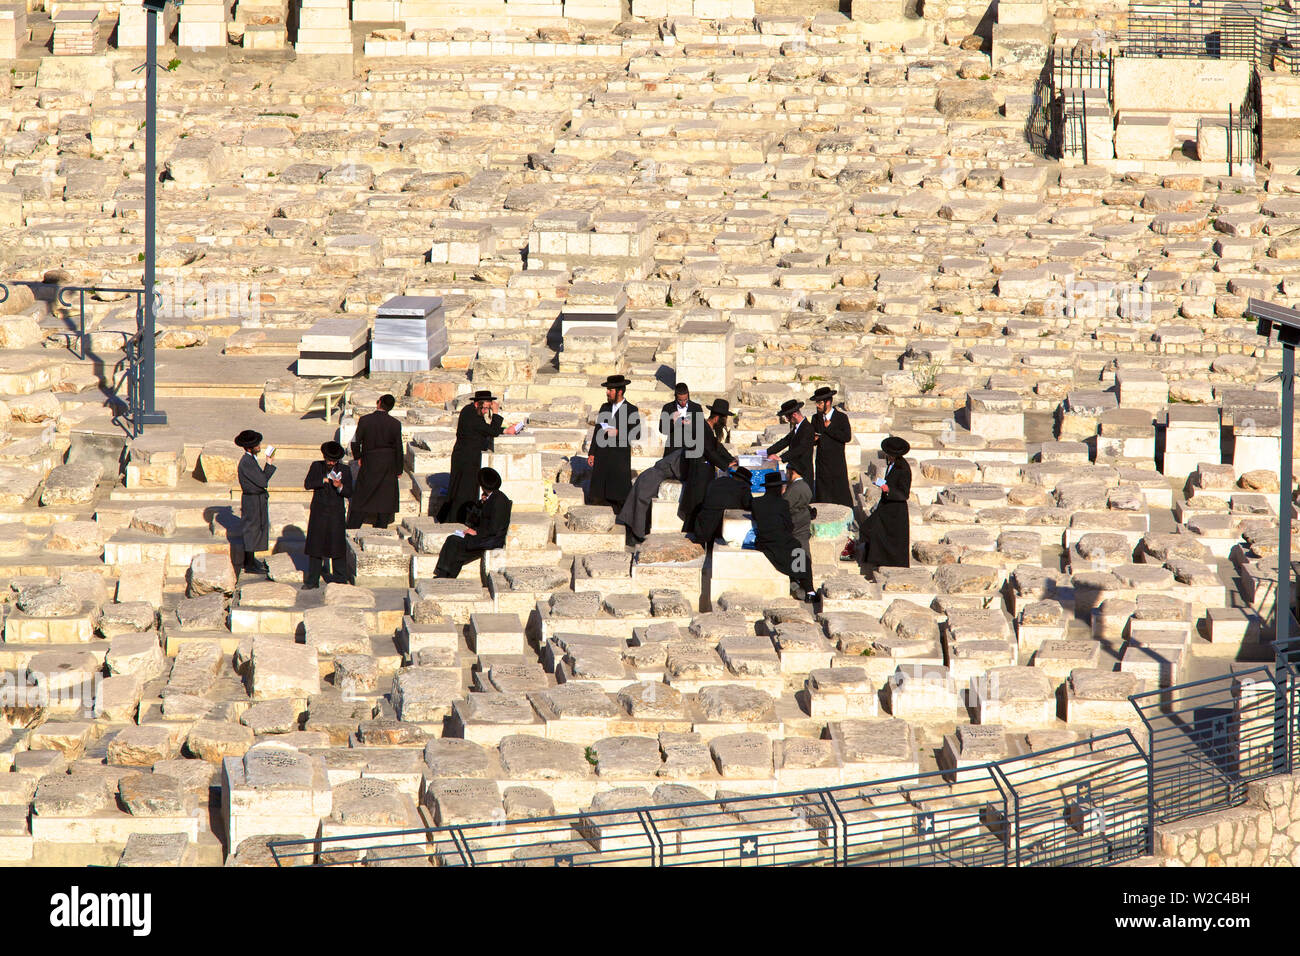 Orthodox Jews Praying On A Tomb, Jewish Cemetery, Mount Of Olives, Jerusalem, Israel, Middle East Stock Photo